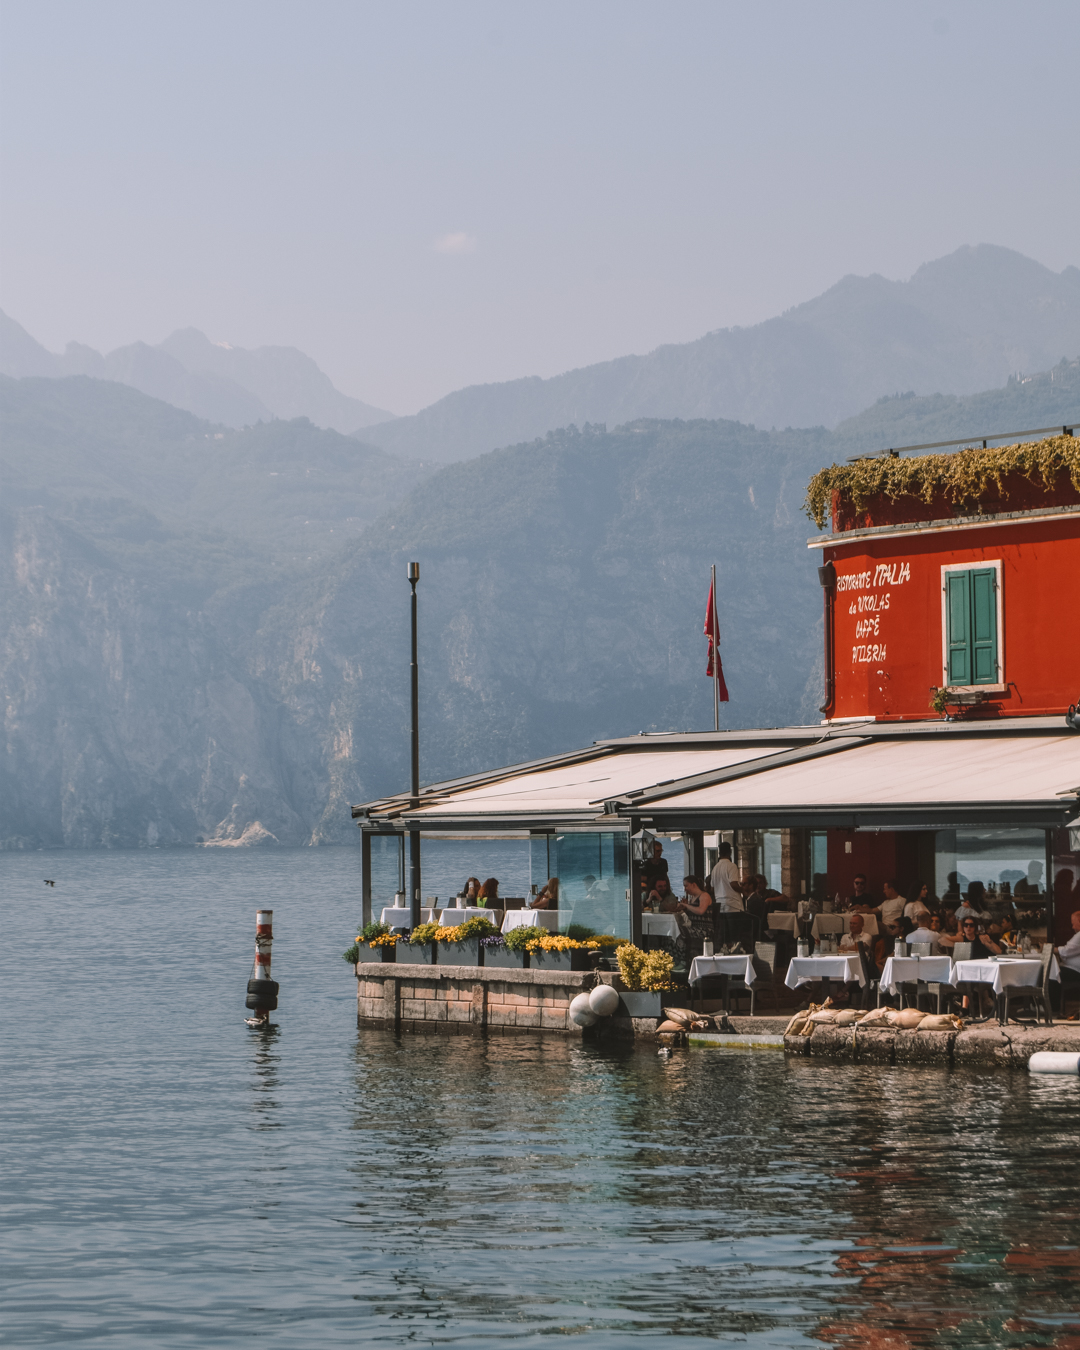 A red restaurant on the water in Malcesine